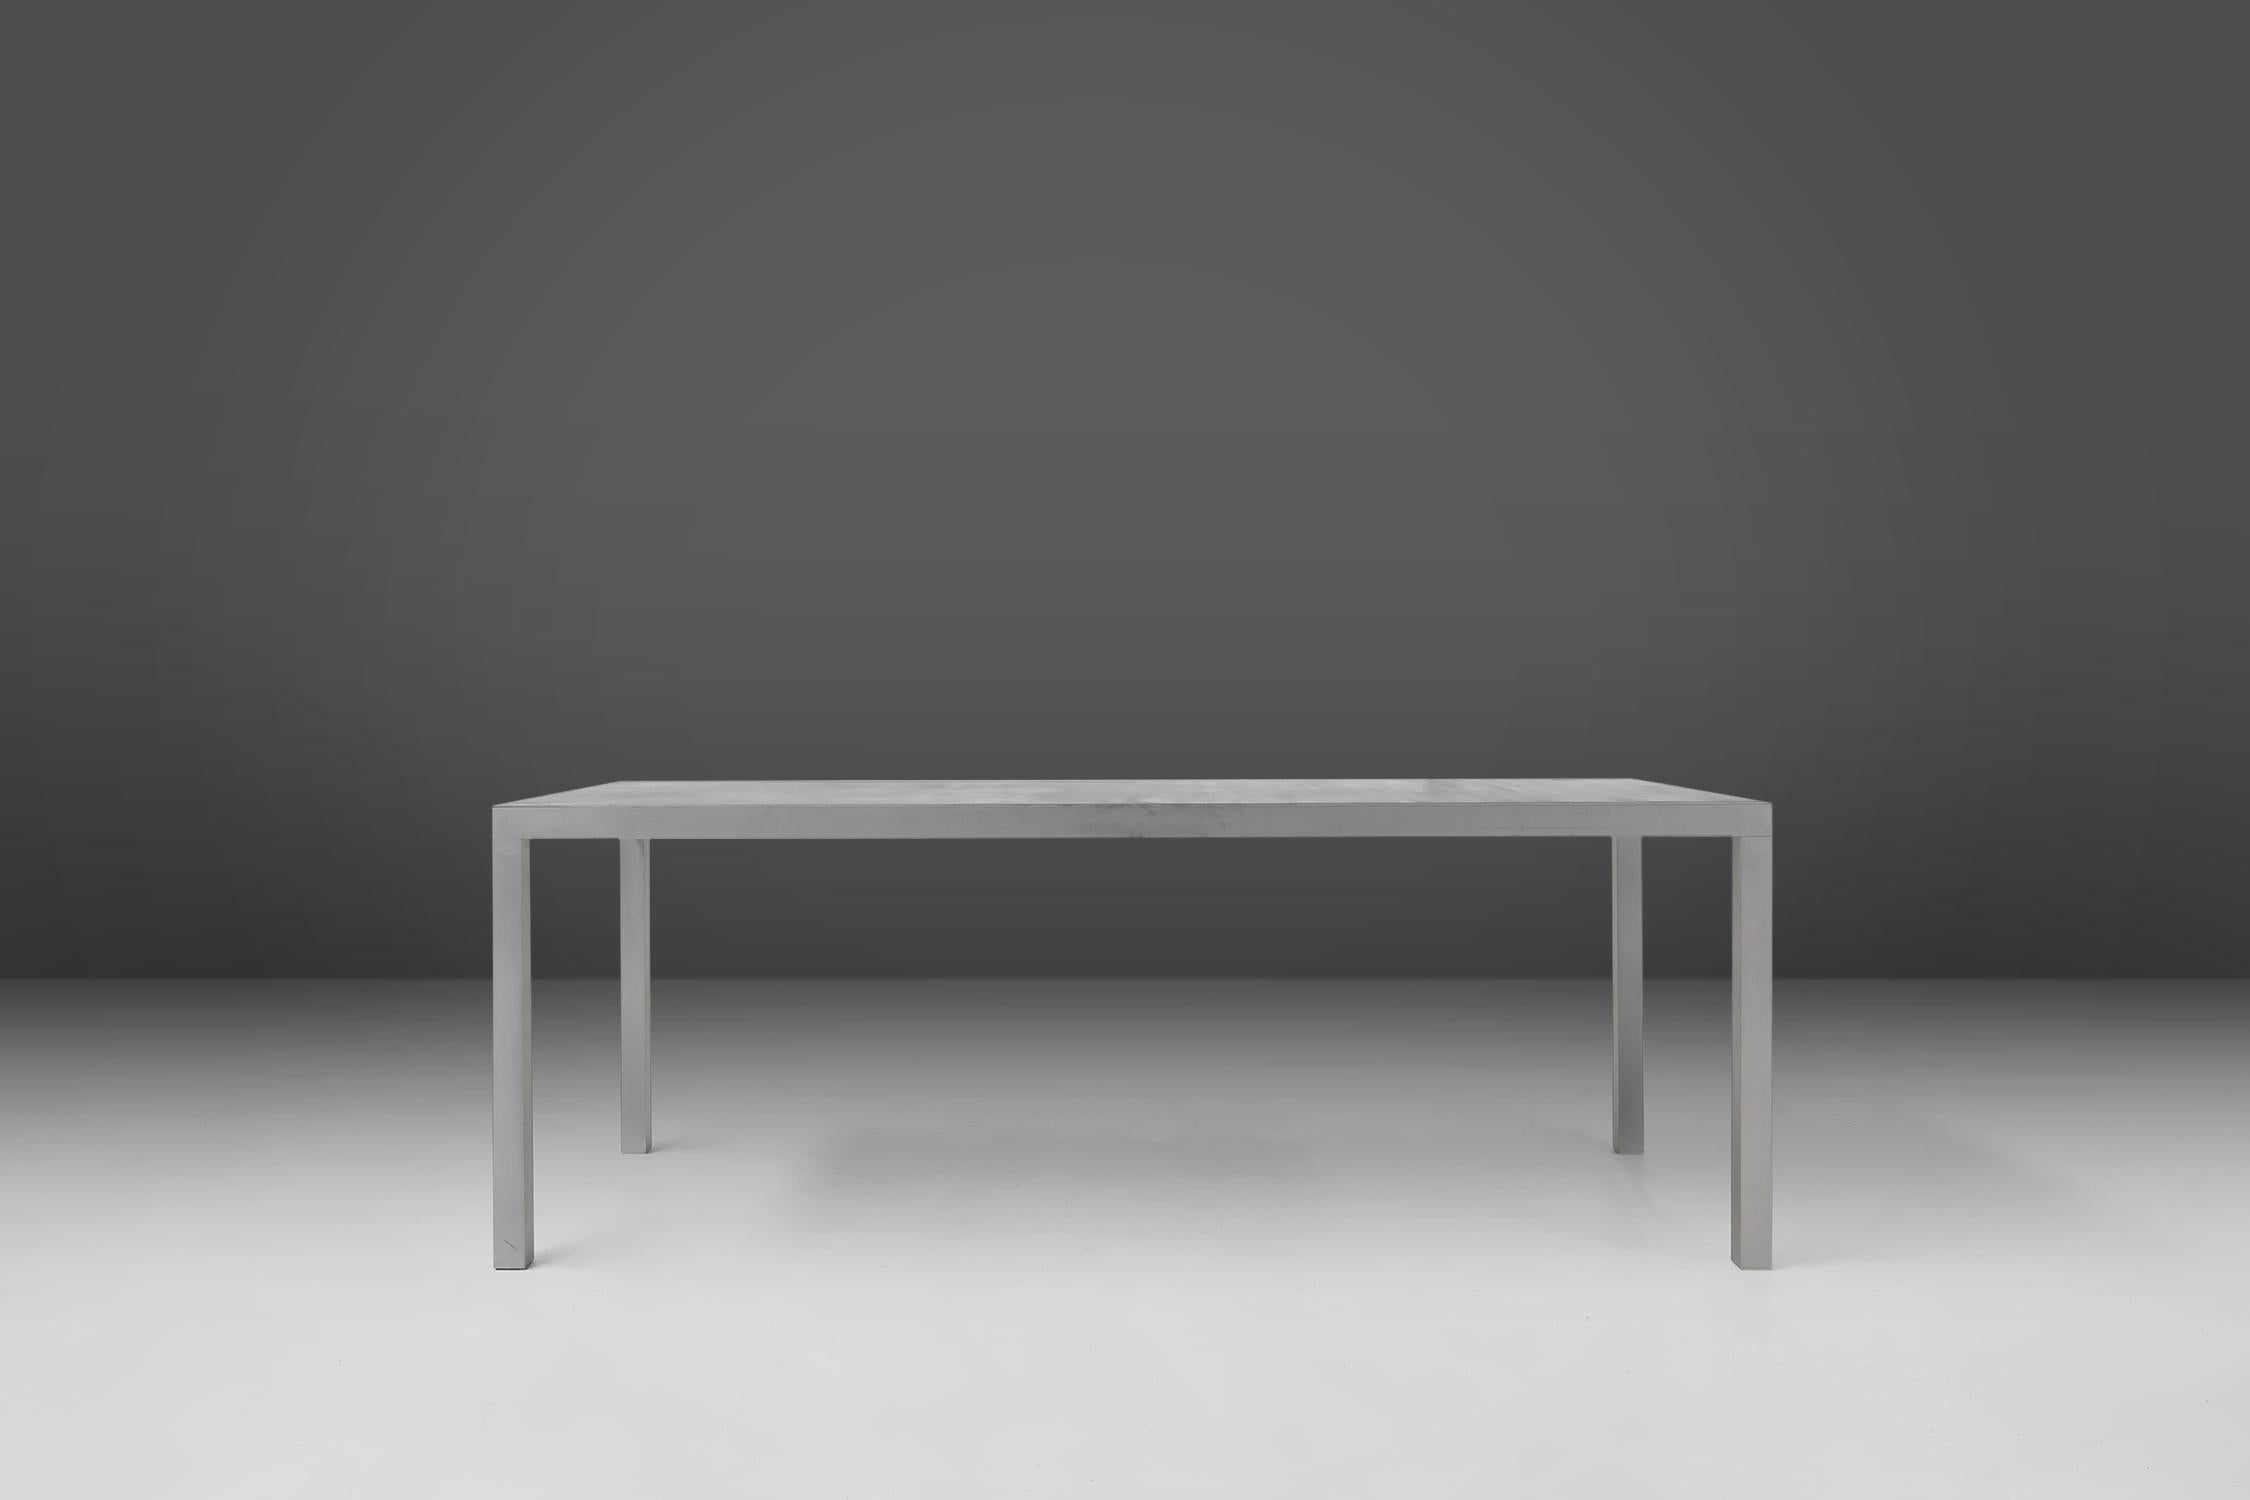 Belgium / 1990 / table T88A / Maarten van Severen / Top Mouton / aluminium / modern / post-modern / mid-century design

This rare and iconic table by the Belgium designer Maarten Van Severen T88A in aluminium is suitable for work or as dining table